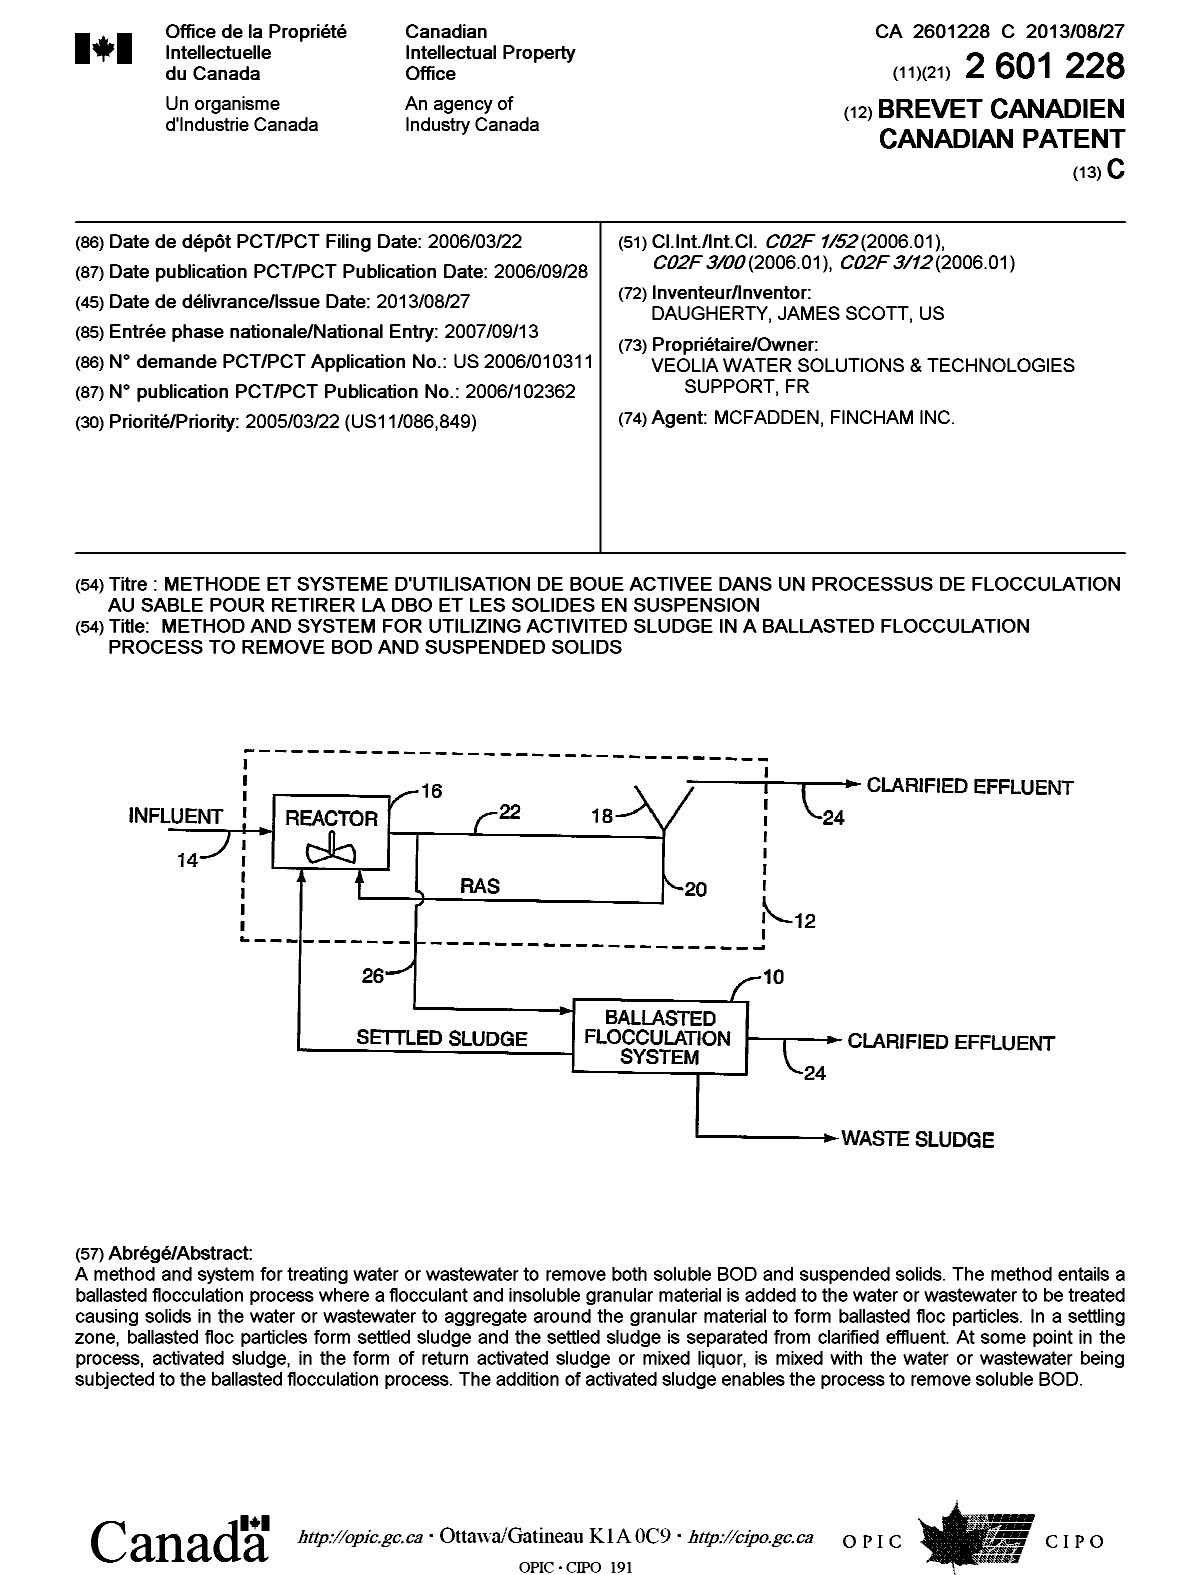 Canadian Patent Document 2601228. Cover Page 20130730. Image 1 of 1